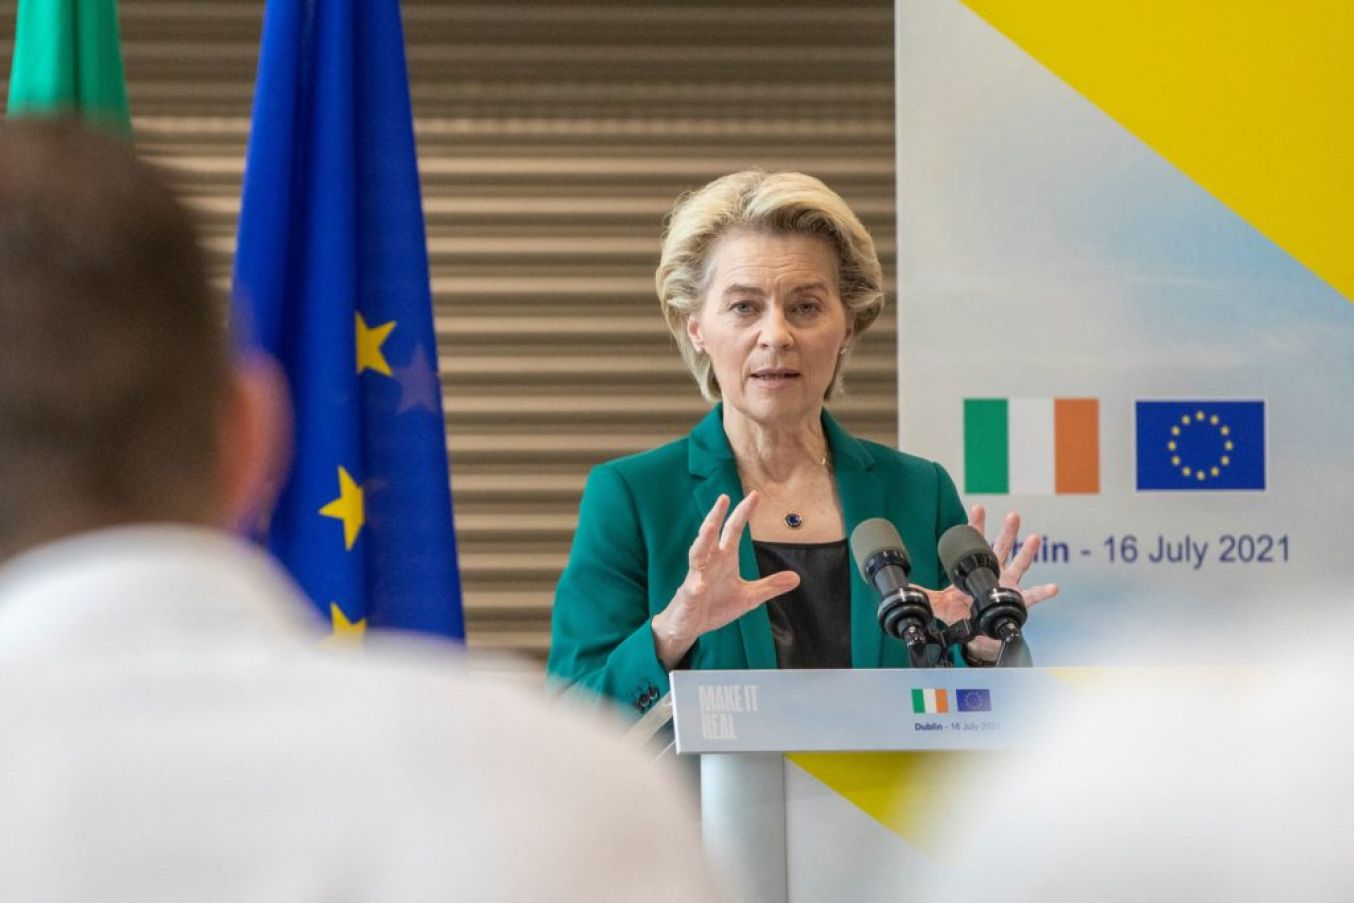 European Commission President Ursula Von Der Leyen During A Press Conference At Technological University Dublin On July 16Th. Photo: Paul Faith/Afp Via Getty